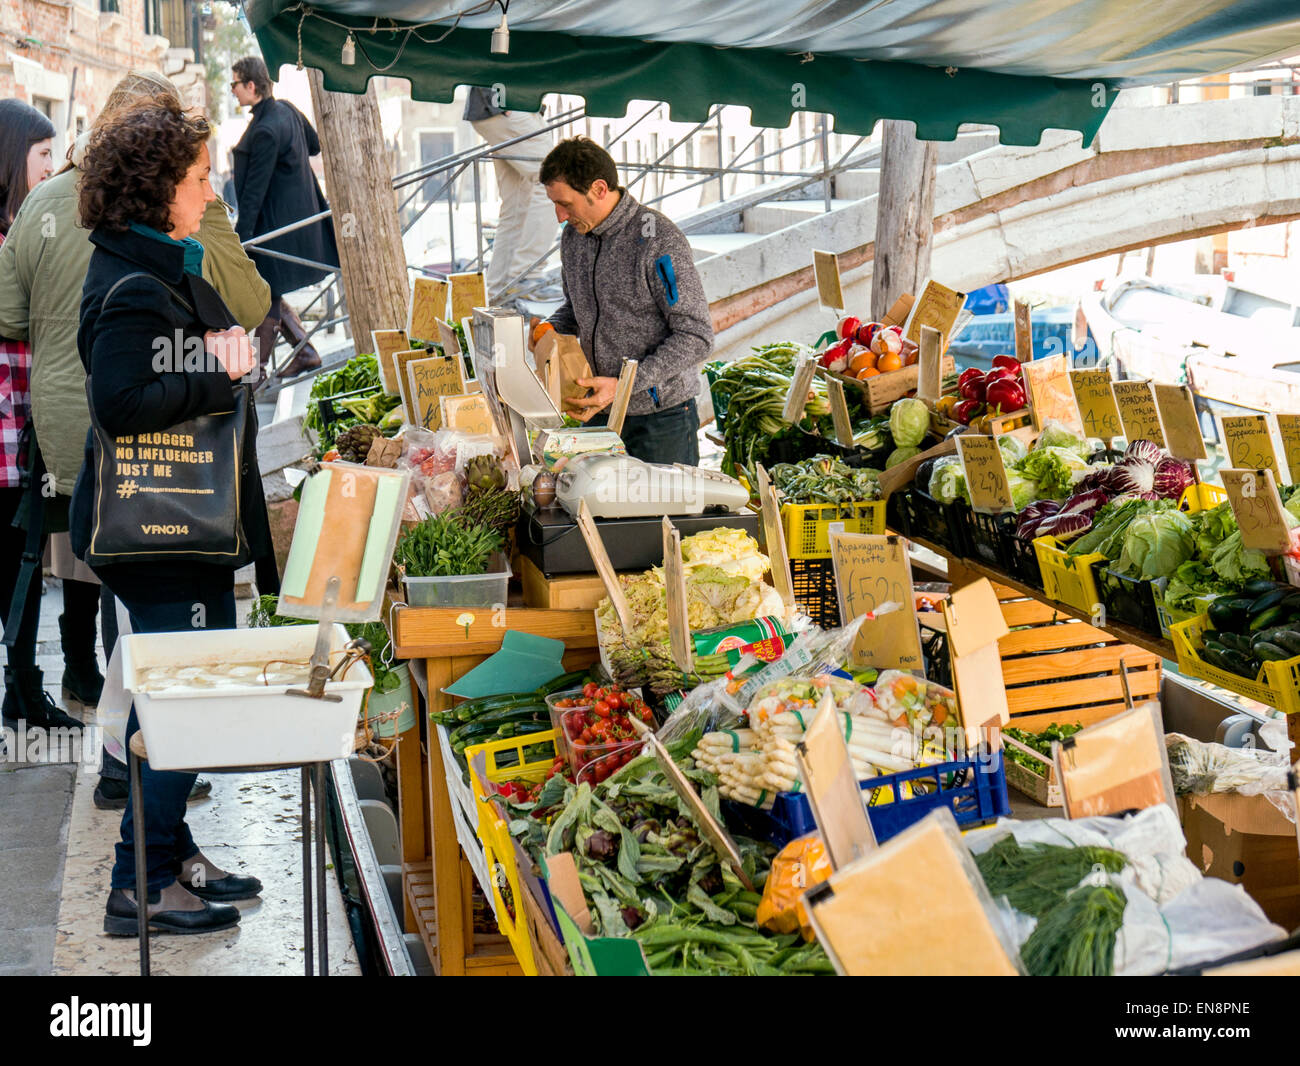 Vendor displays fresh fruit & vegetables on market boat, Venice, Italy, City of Canals Stock Photo